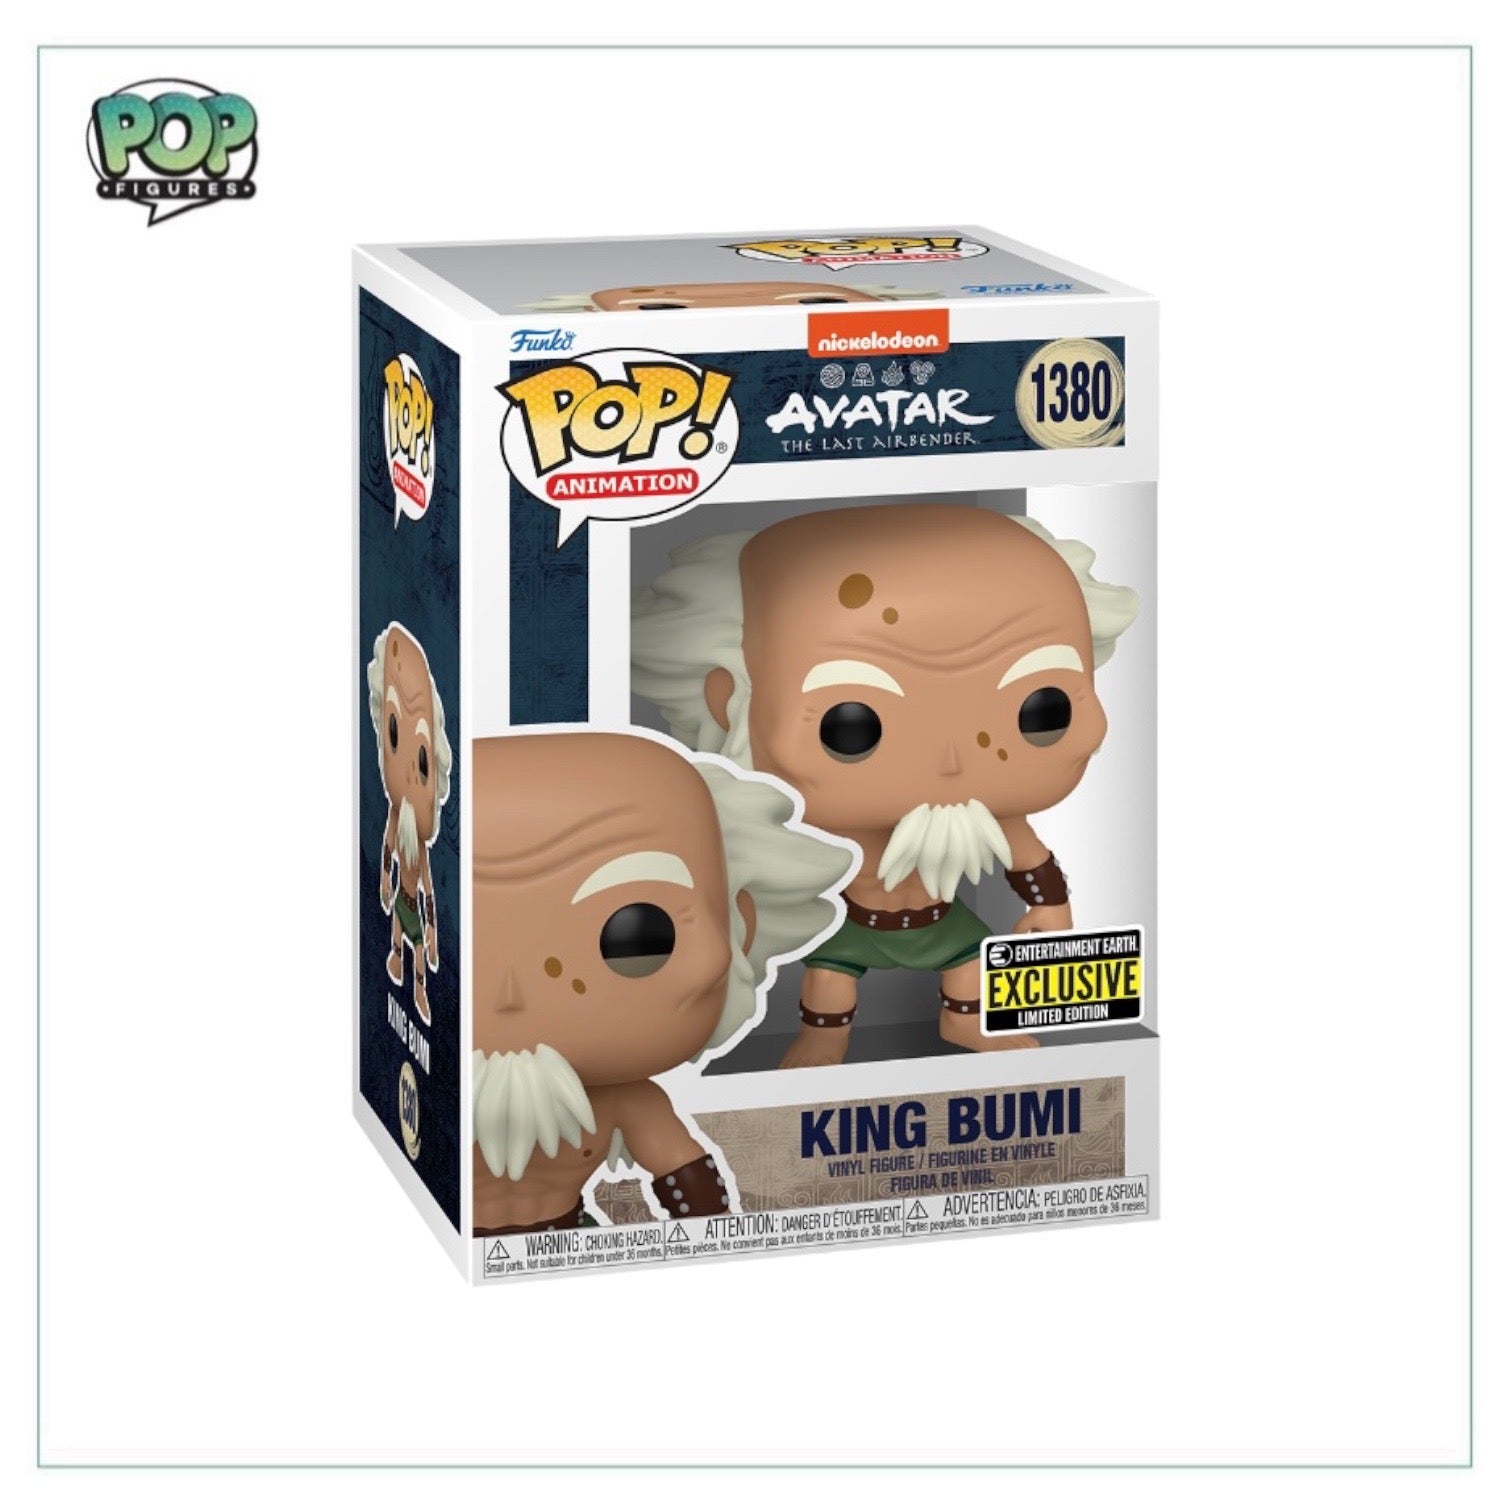 King Bumi #1380 Funko Pop! - Avatar The Last Airbender - Entertainment Earth Exclusive - Angry Cat